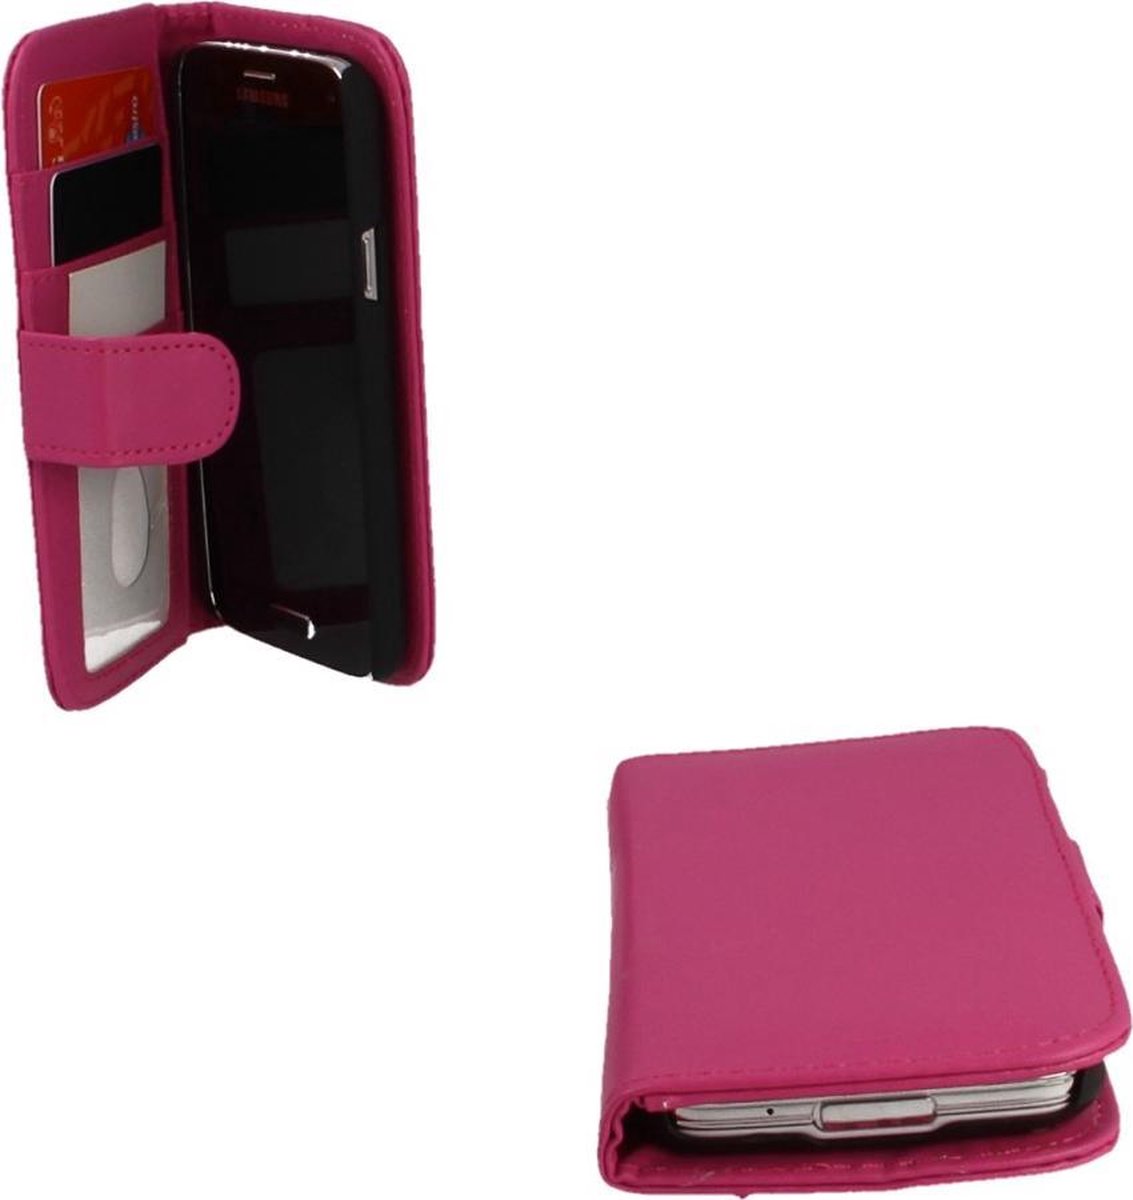 Samsung Galaxy S5 mini G800 Luxury PU Leather Flip Case With Wallet & Stand Function Roze Pink